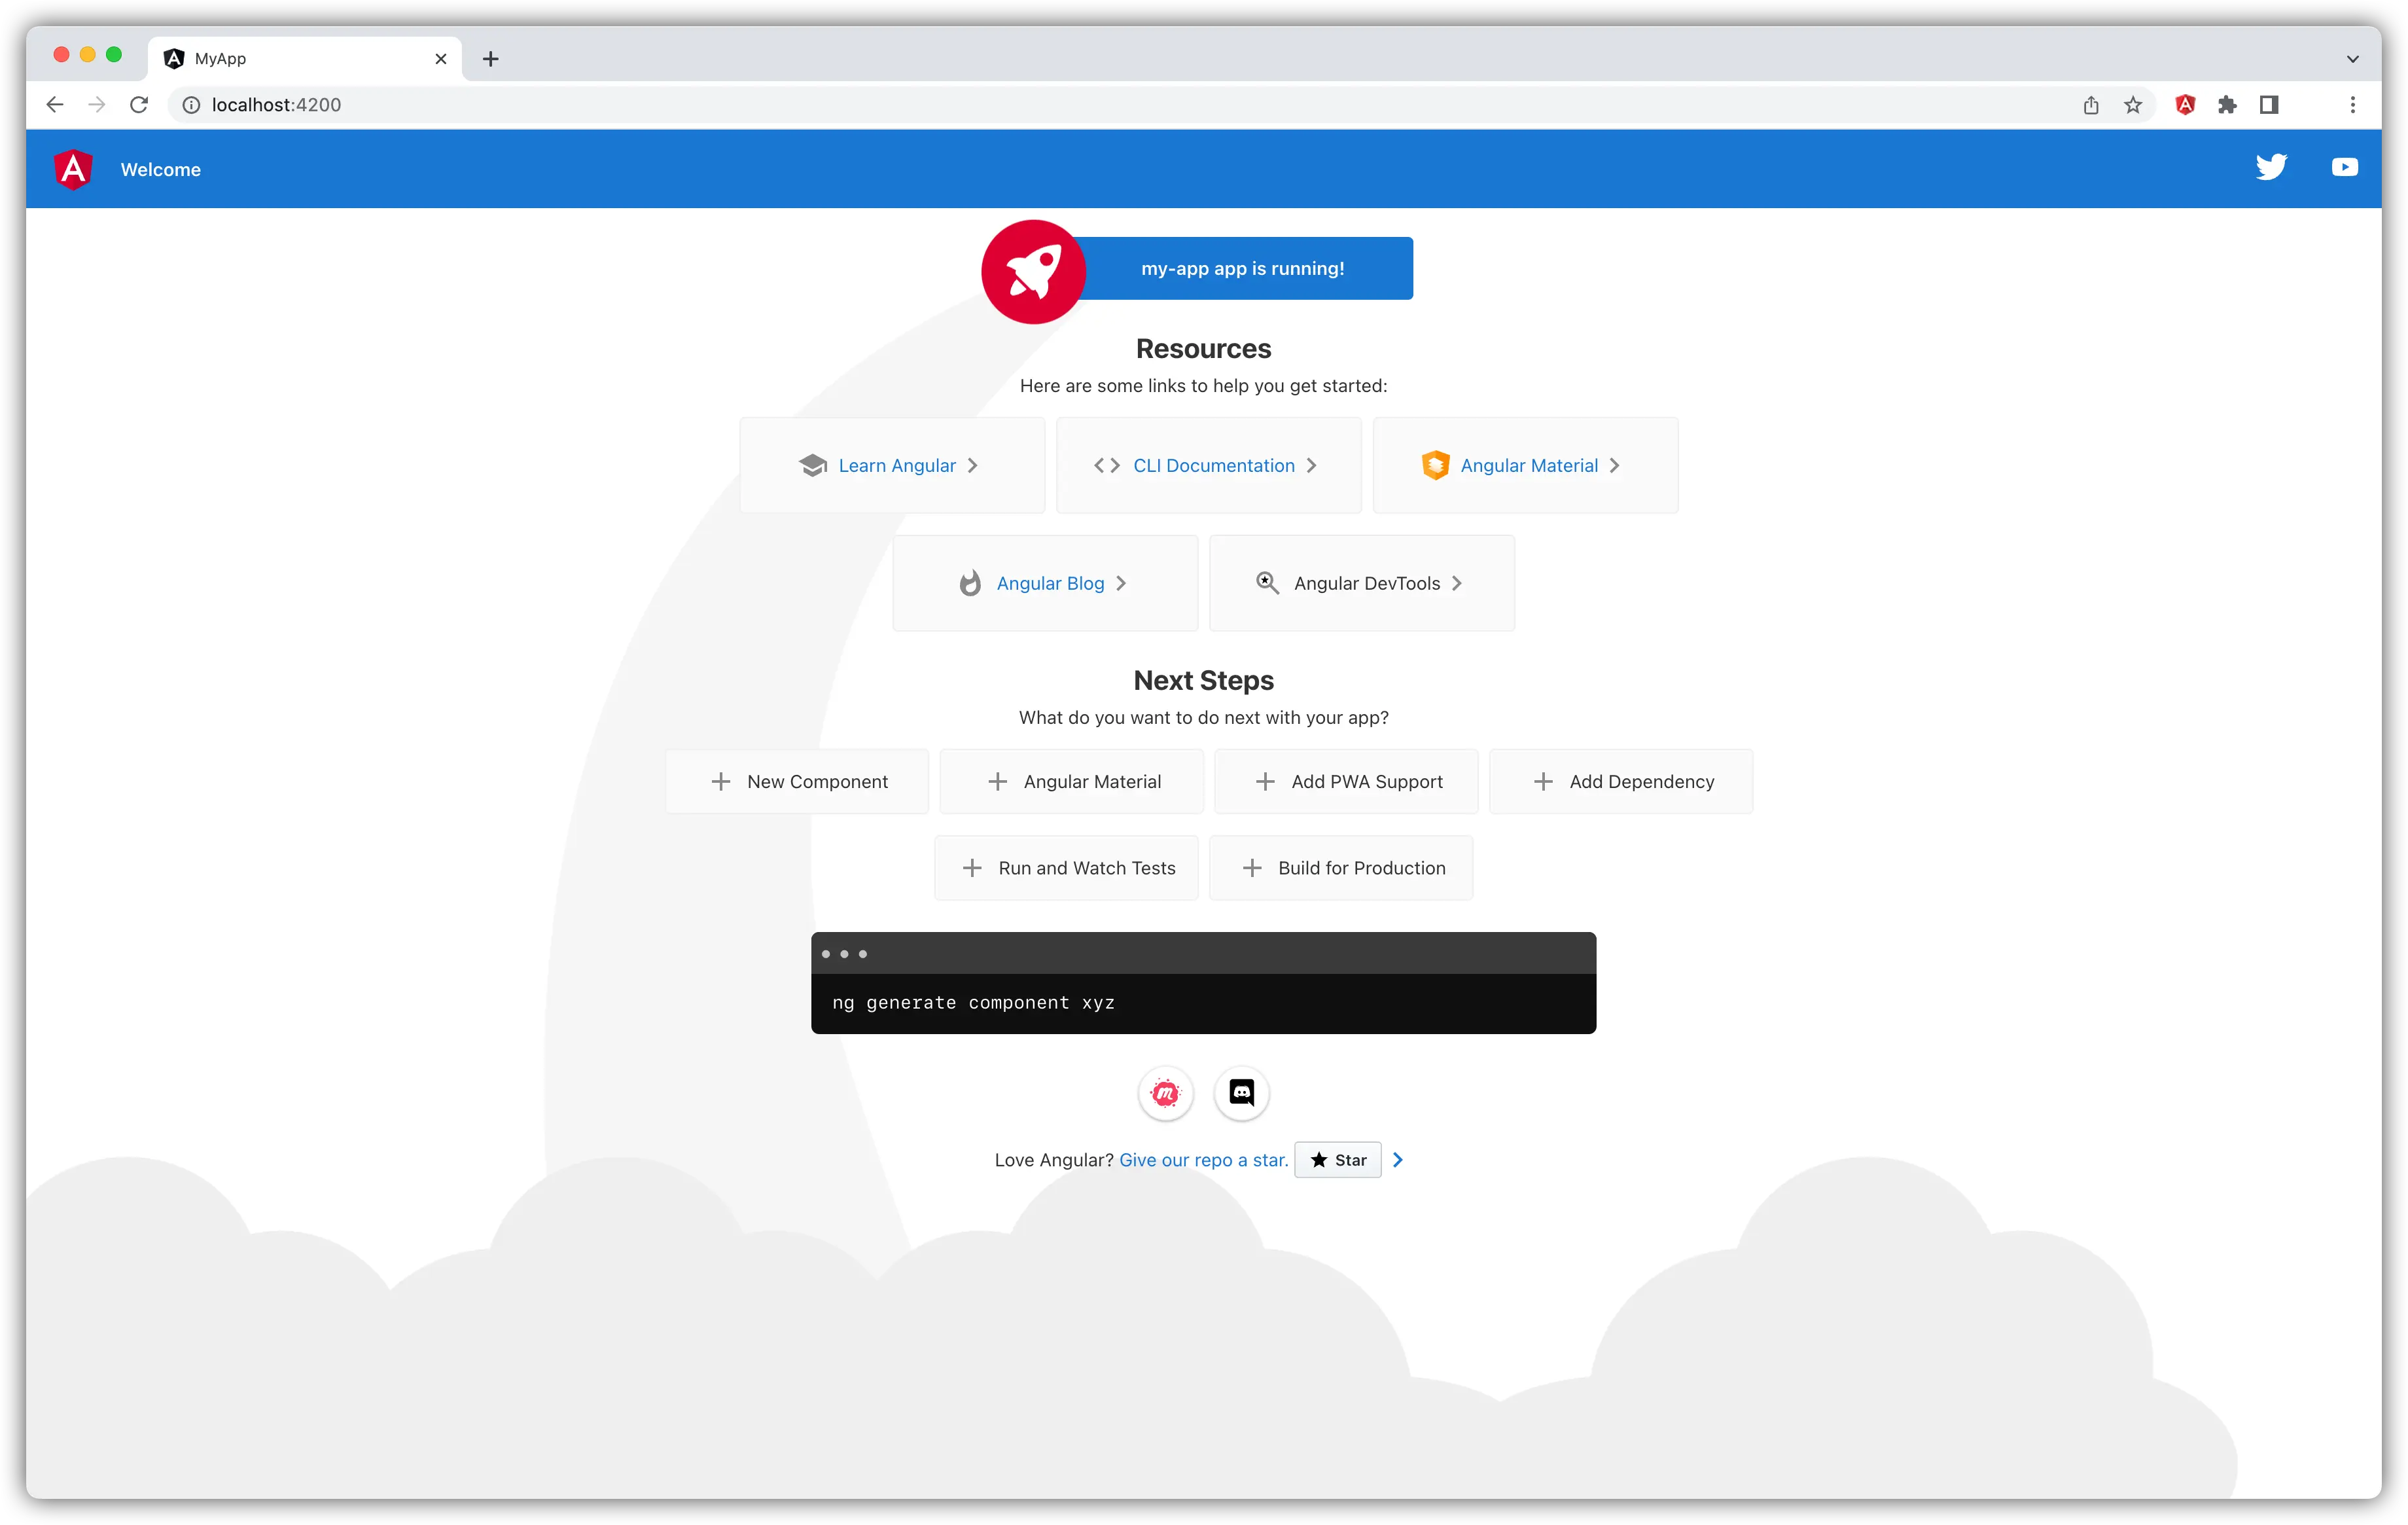 angular-app-cloudflare-pages-06.webp